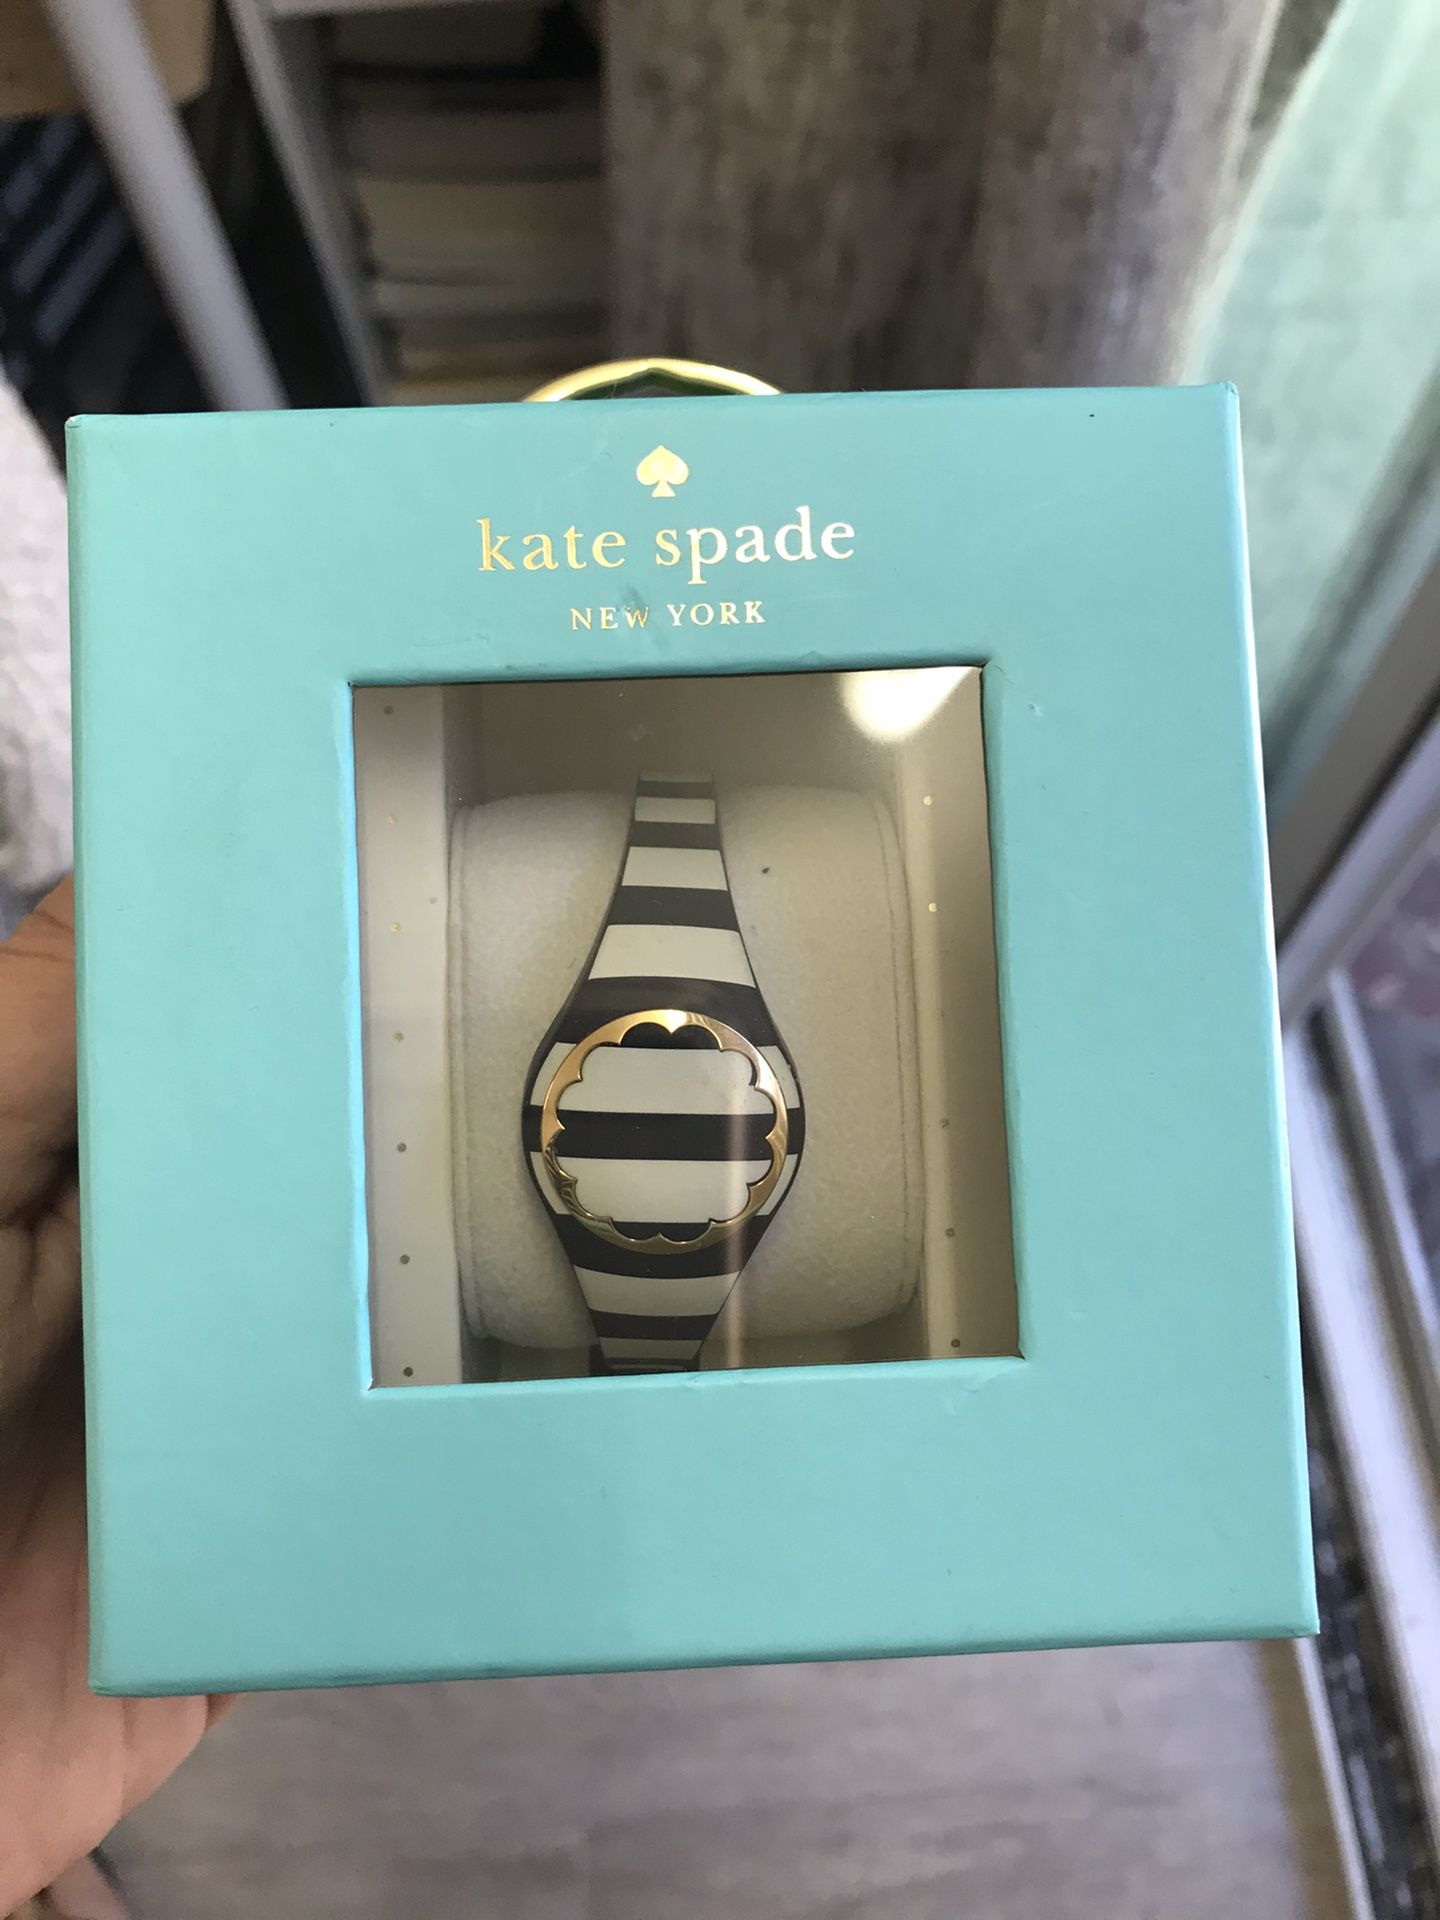 Kate spade steps counter watch